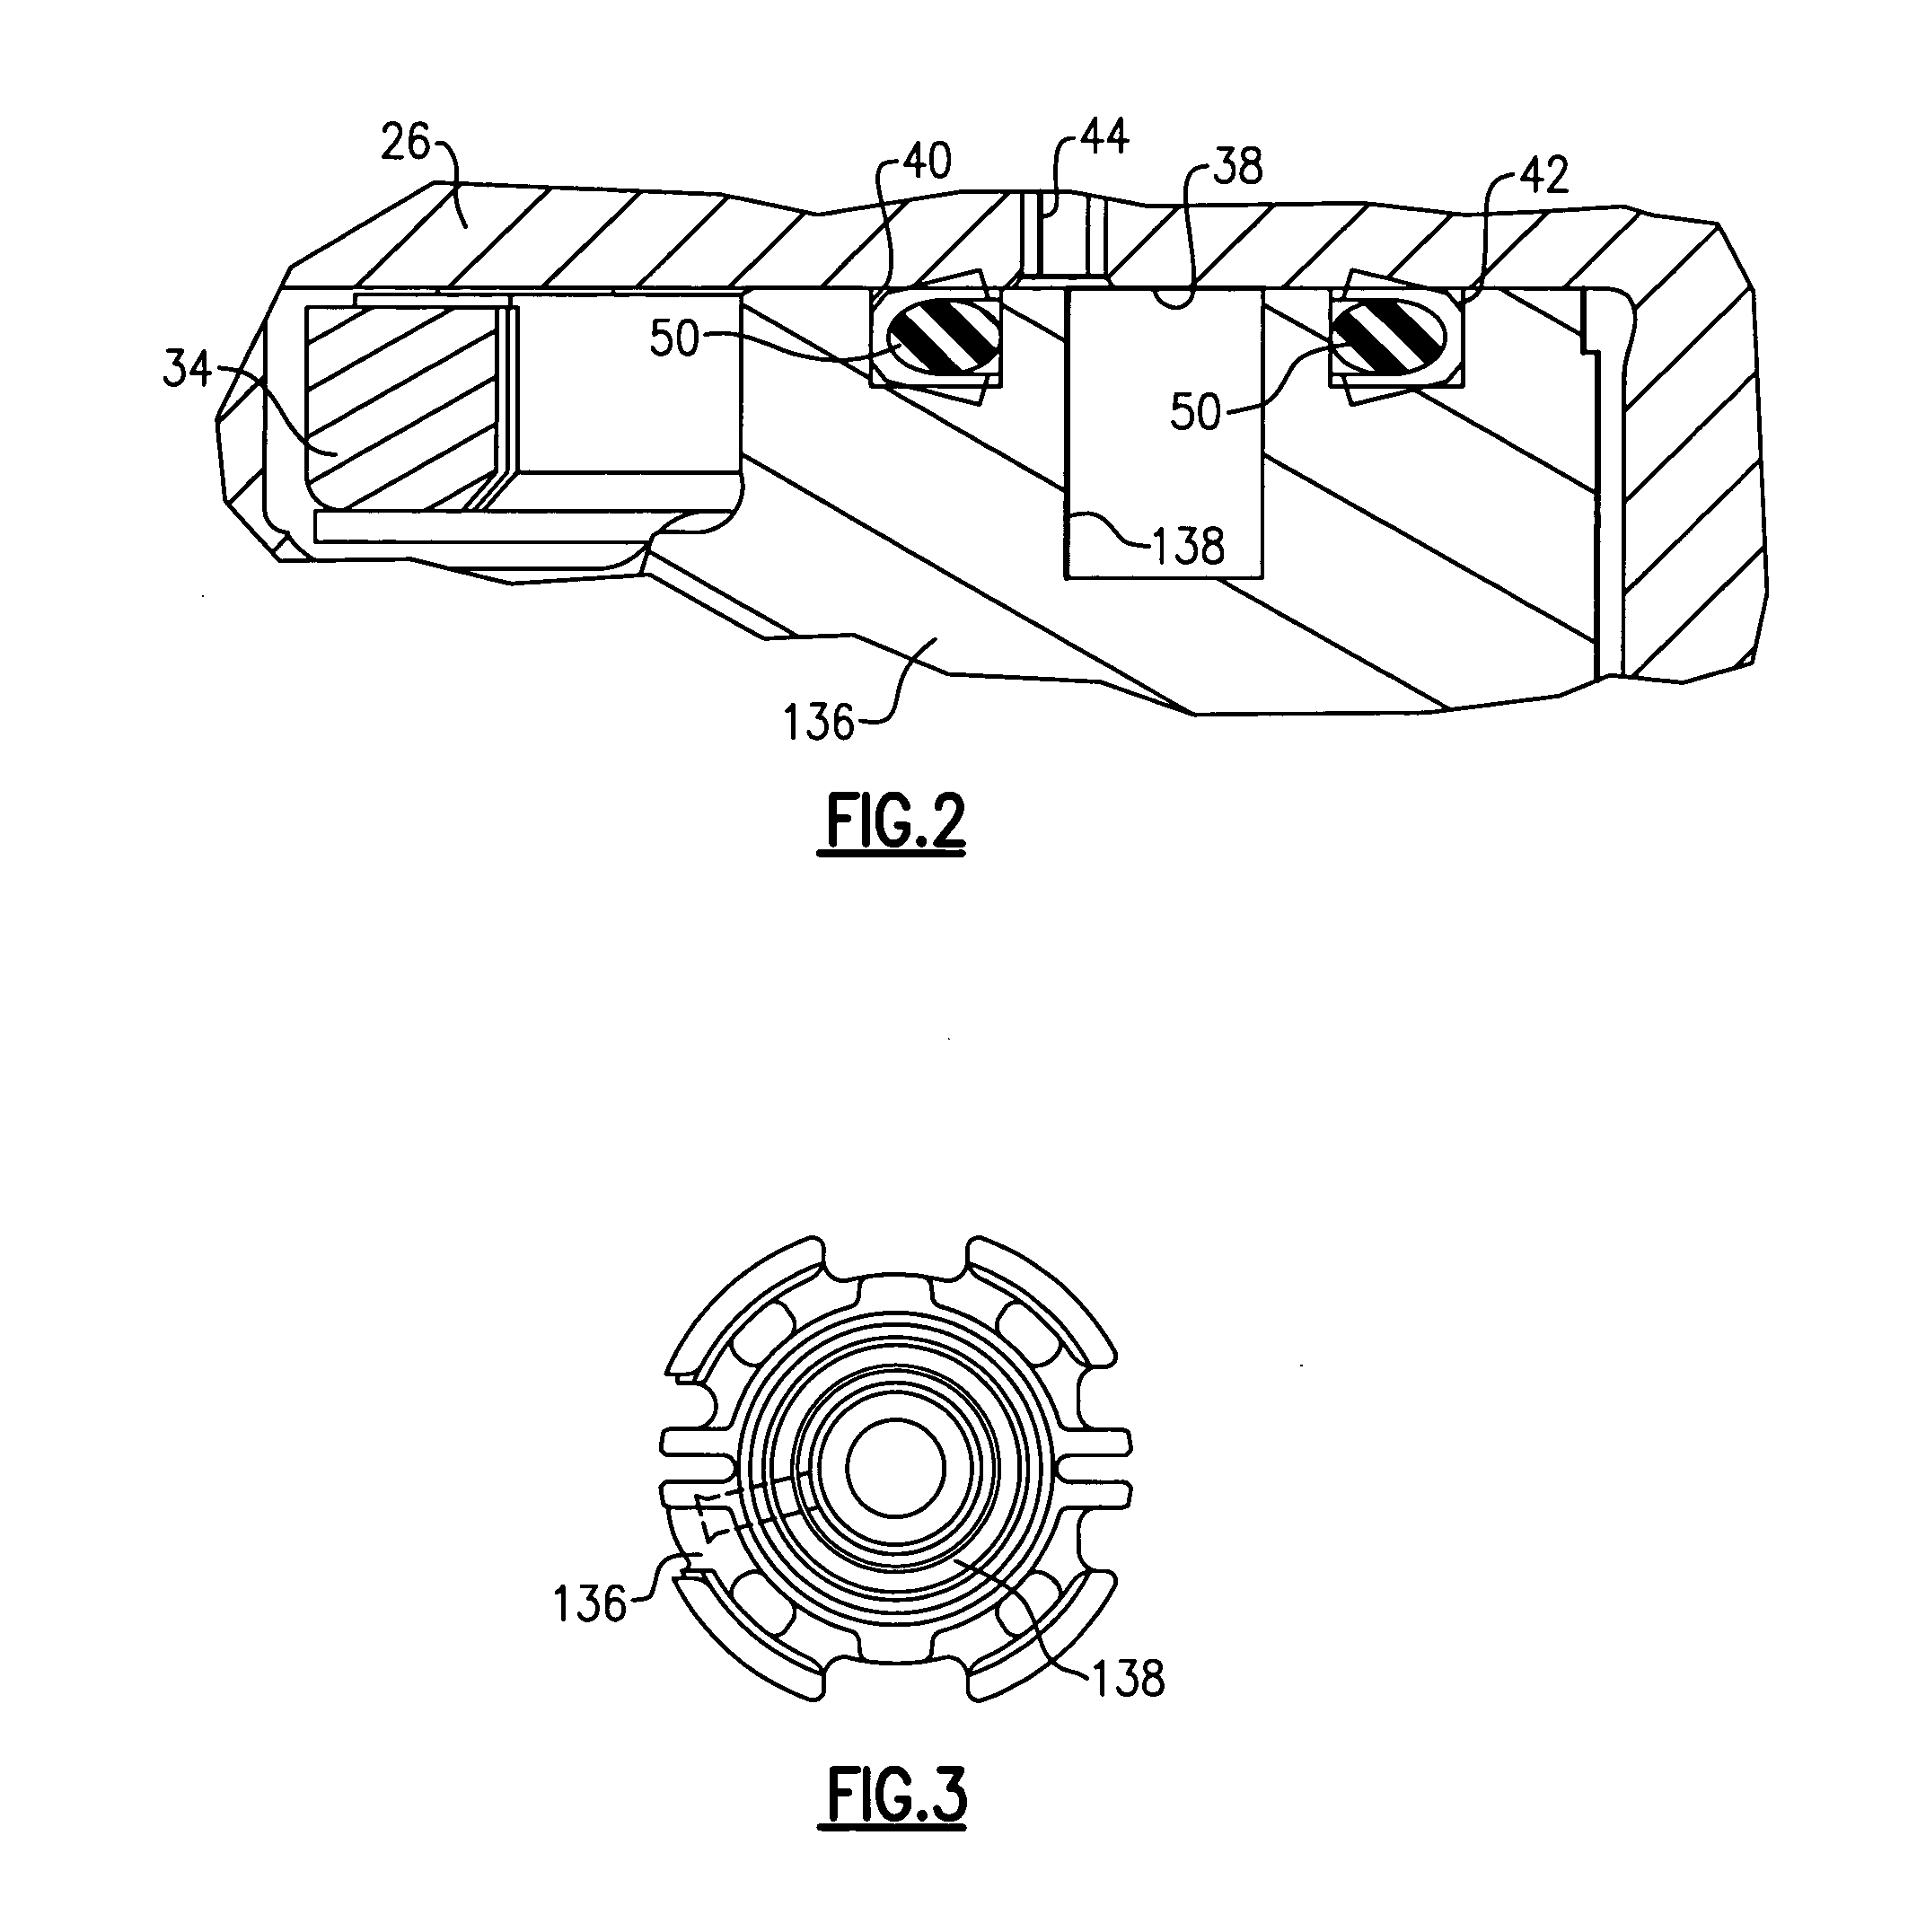 Scroll compressor with back pressure chamber cavity for assisting in start-up